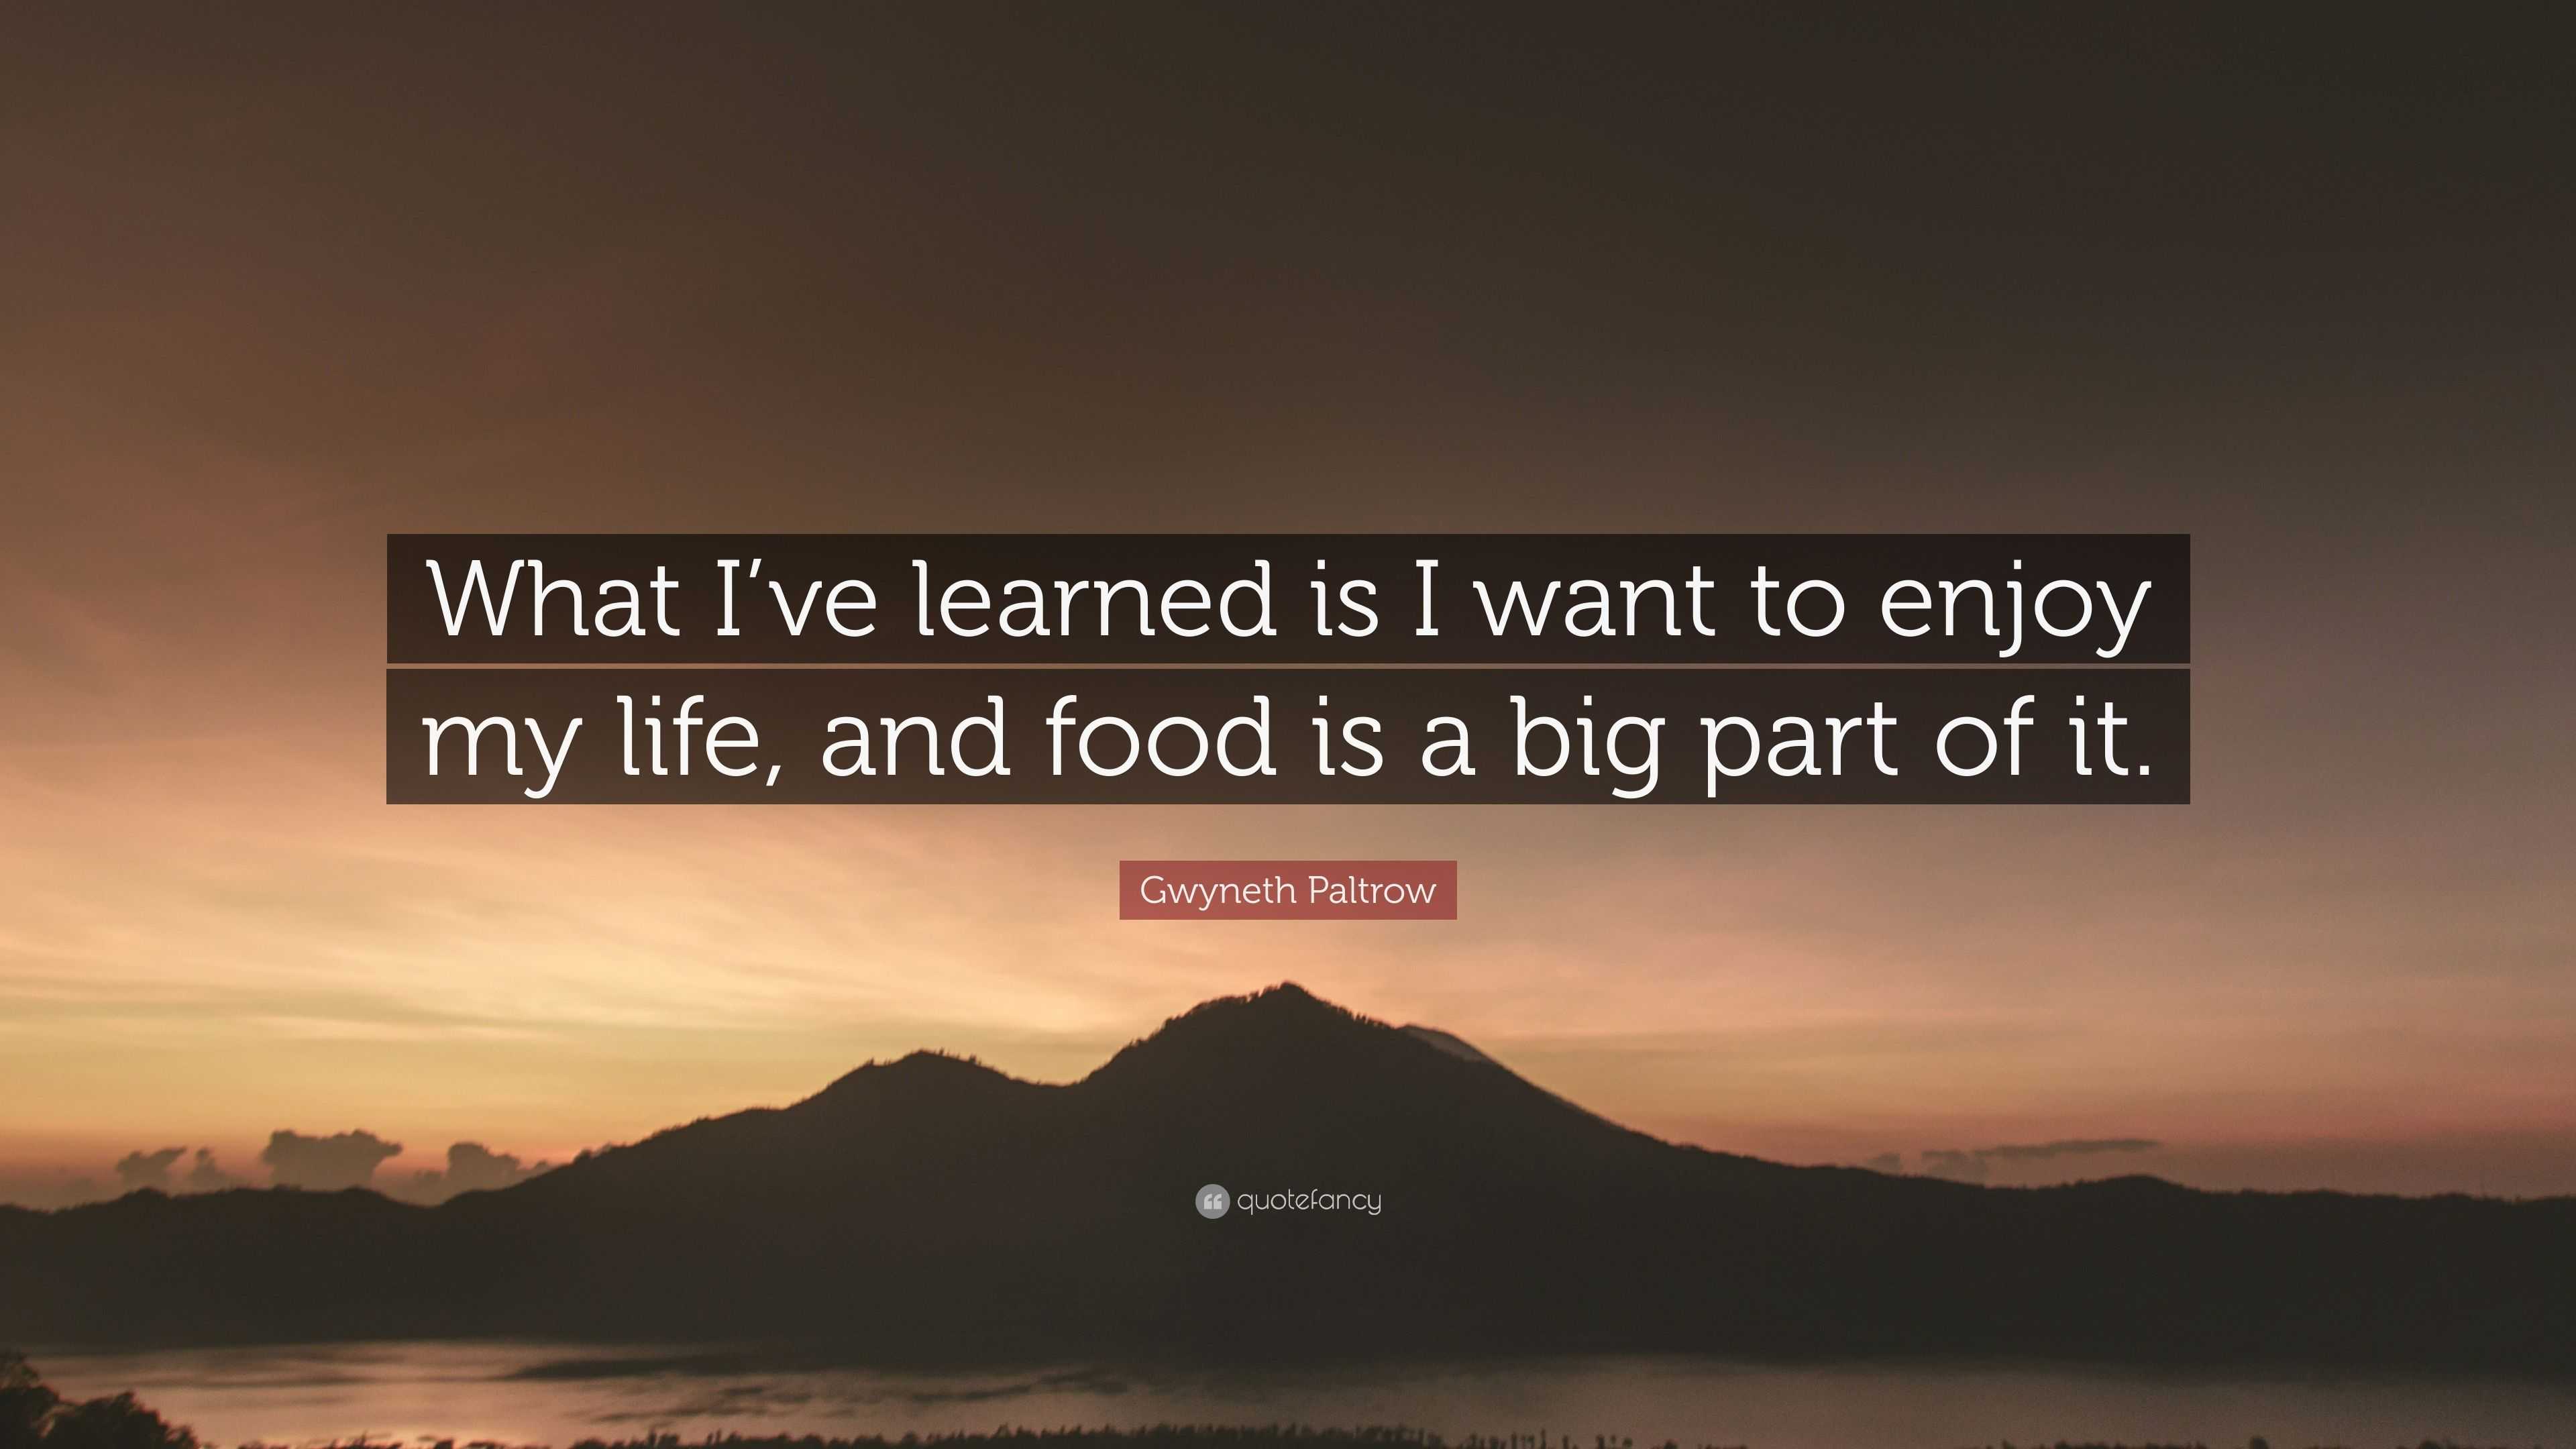 Gwyneth Paltrow Quote “What I ve learned is I want to enjoy my